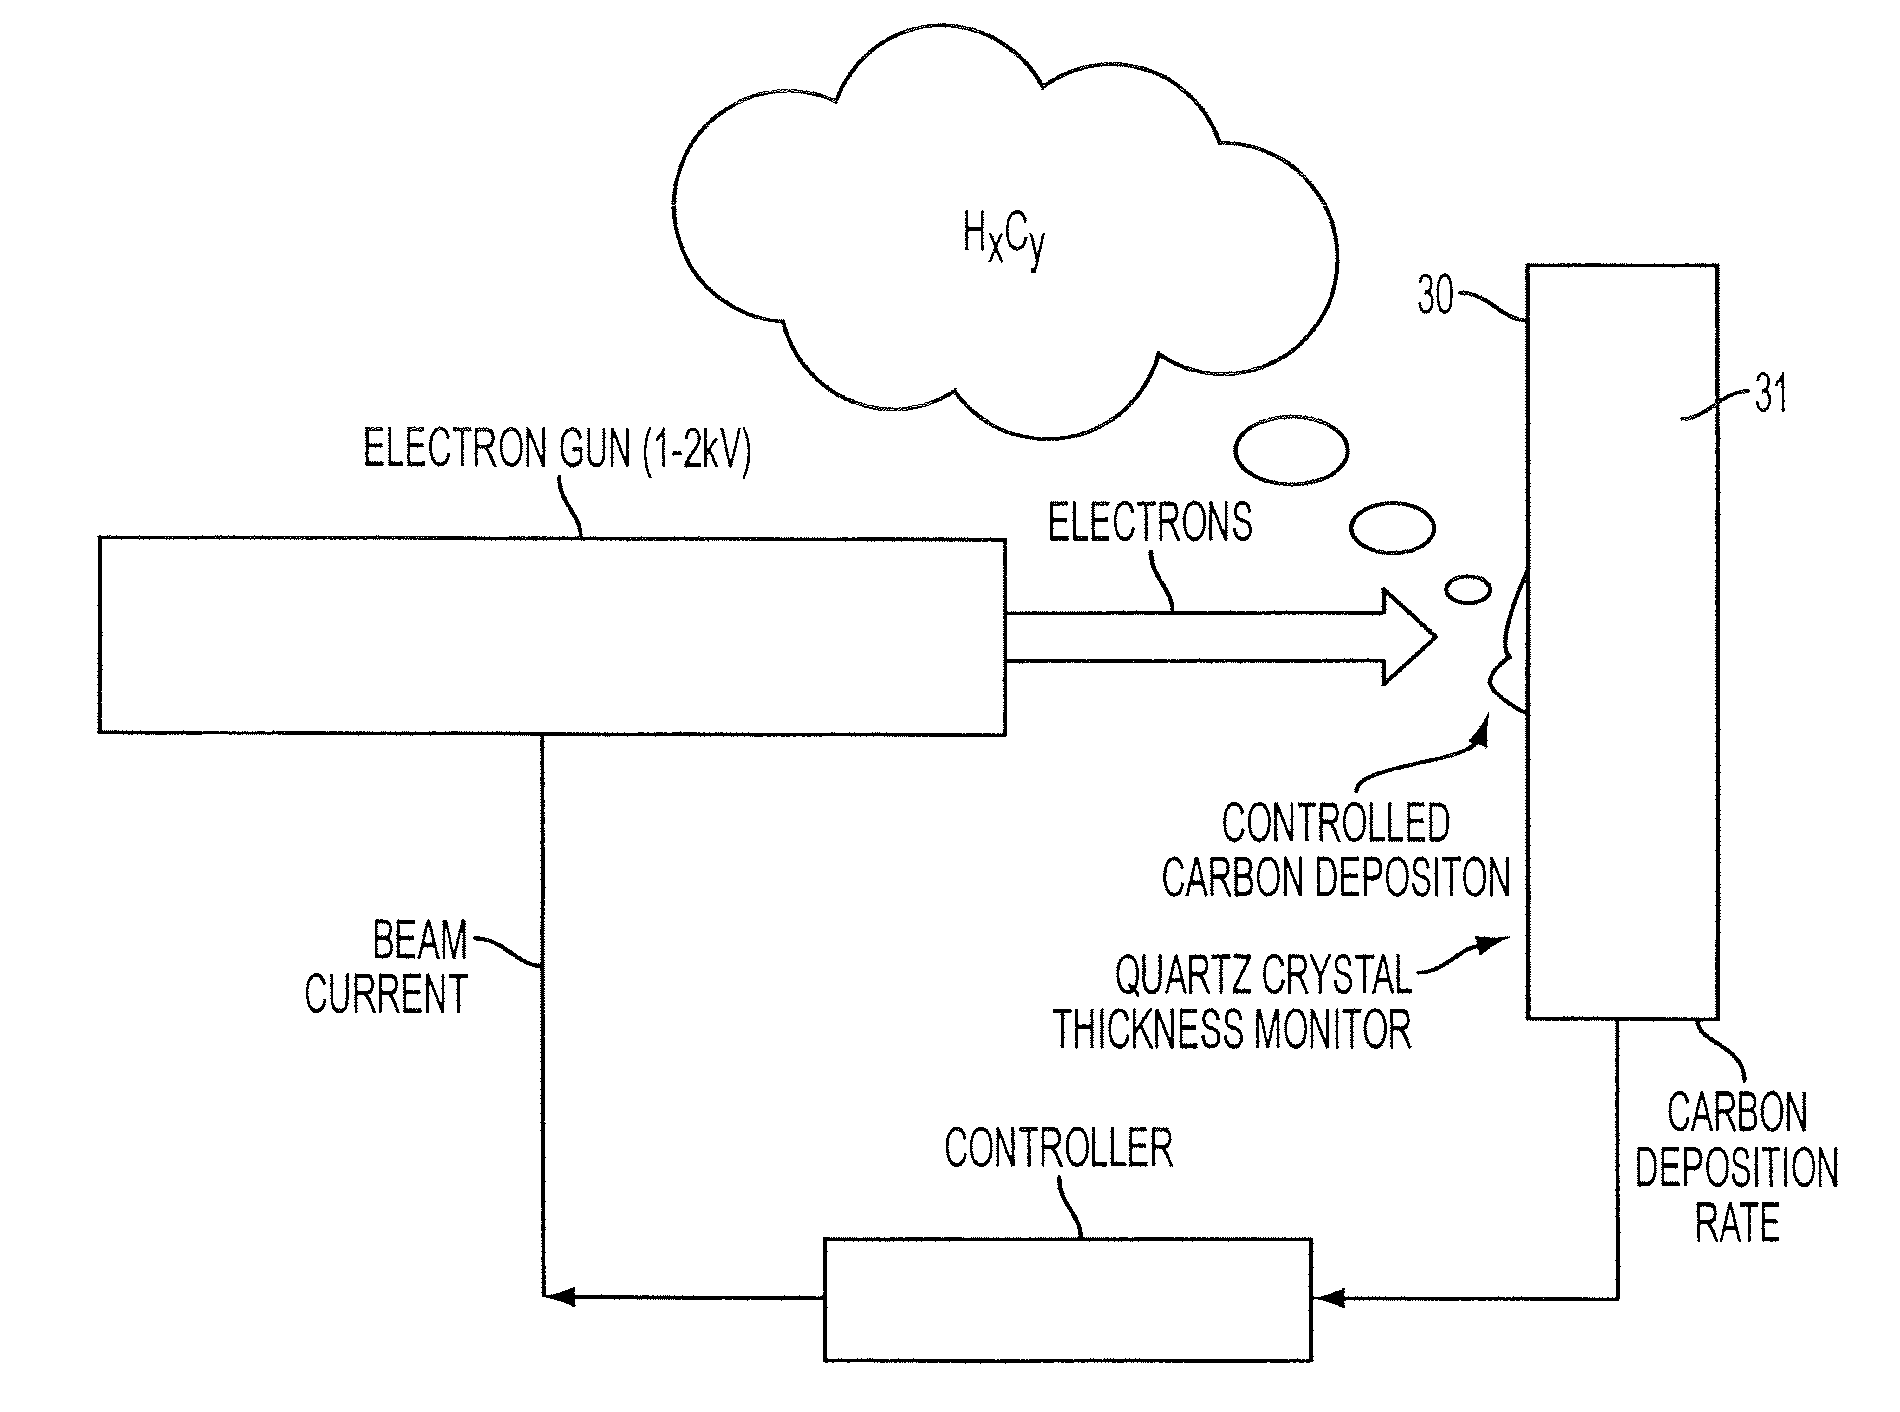 Hydrocarbon getter for lithographic exposure tools